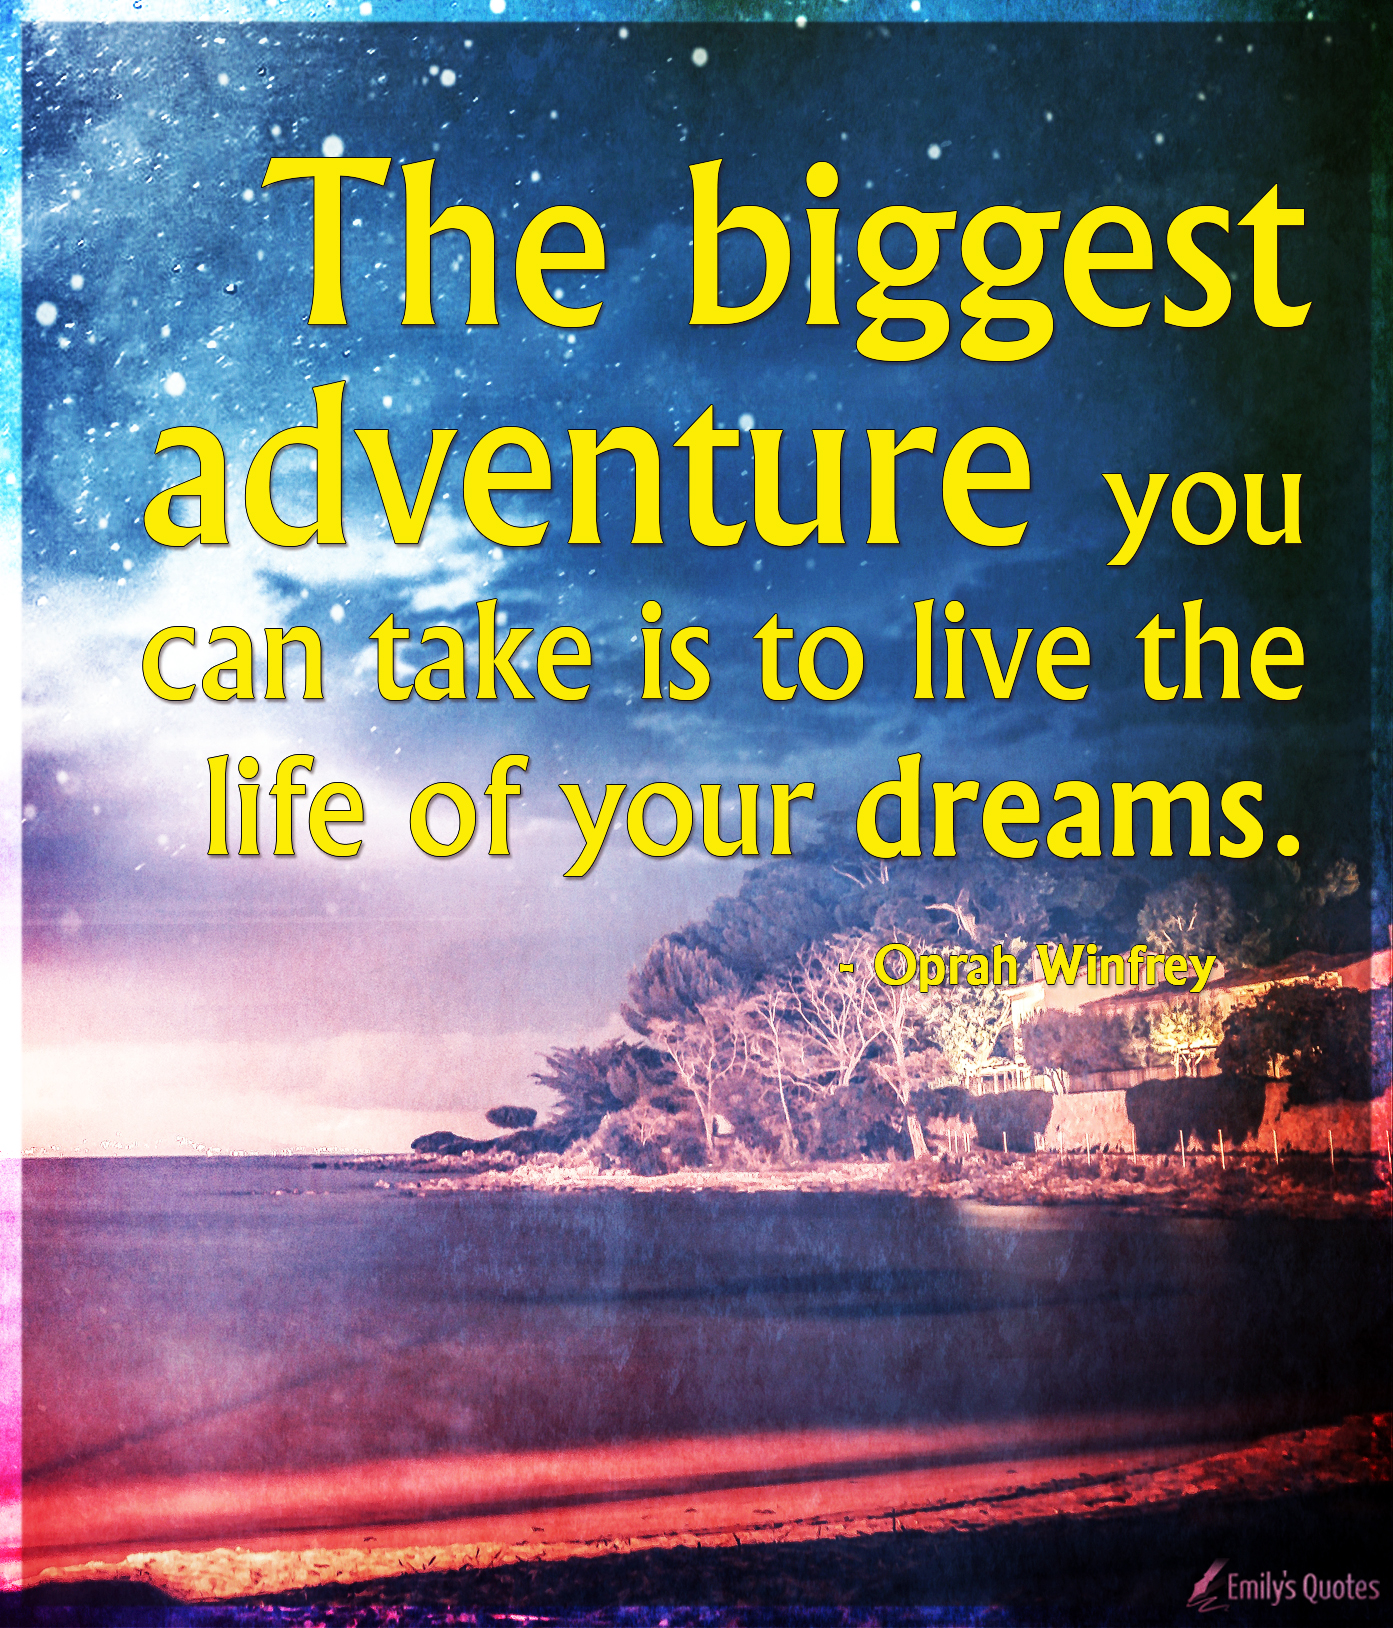 The biggest adventure you can take is to live the life of your dreams